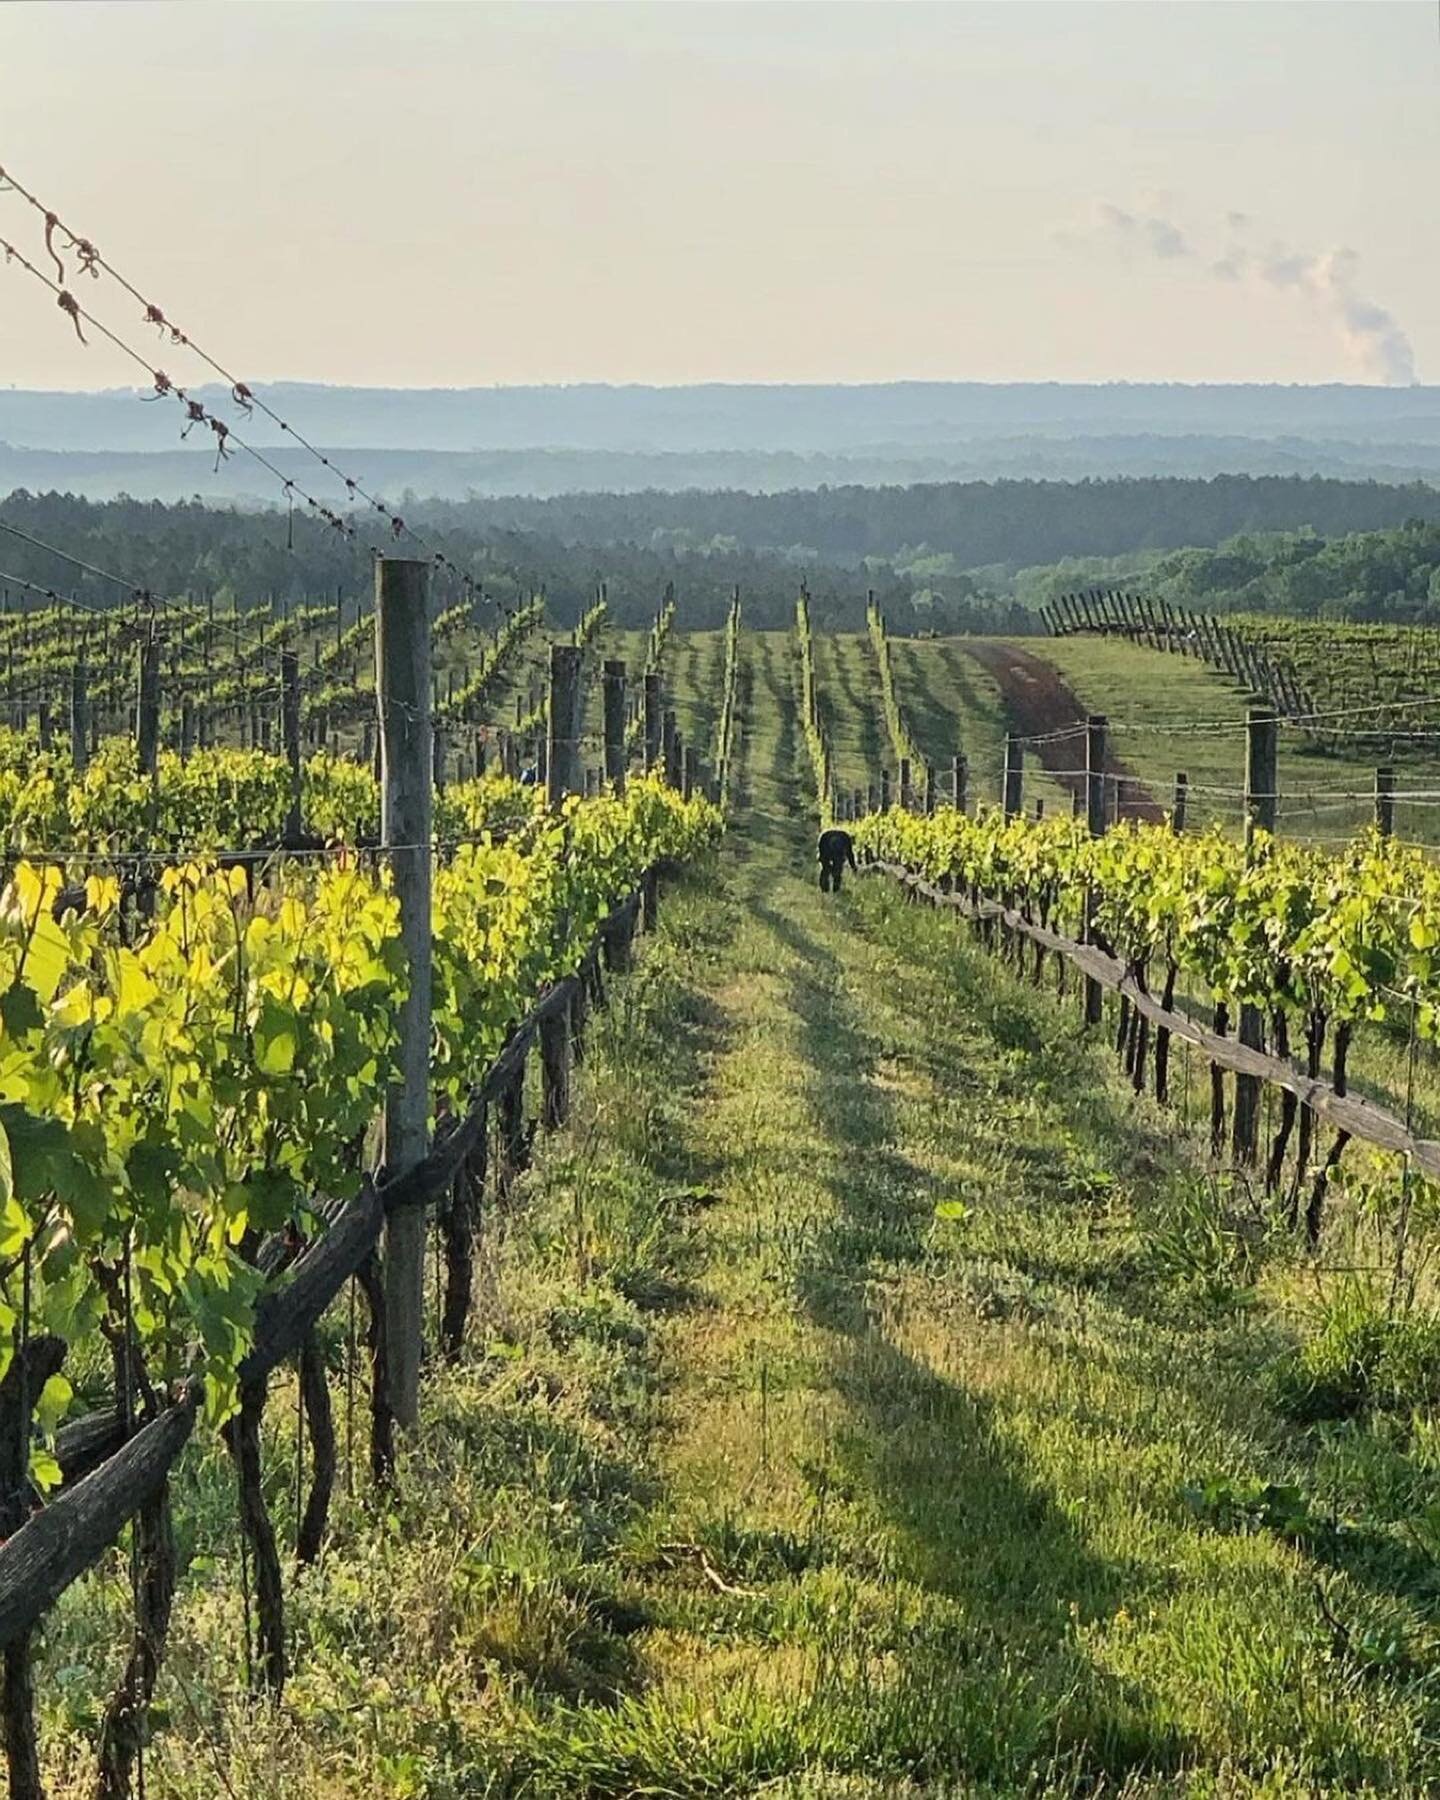 Spring is best spent in the vineyards! This upcoming weekend is full of special events in #vawine country. Whether celebrating Mom or simply looking for a relaxing getaway, head to virginiawine.org/events for more information. 🥂

📷: @blenheimvineya